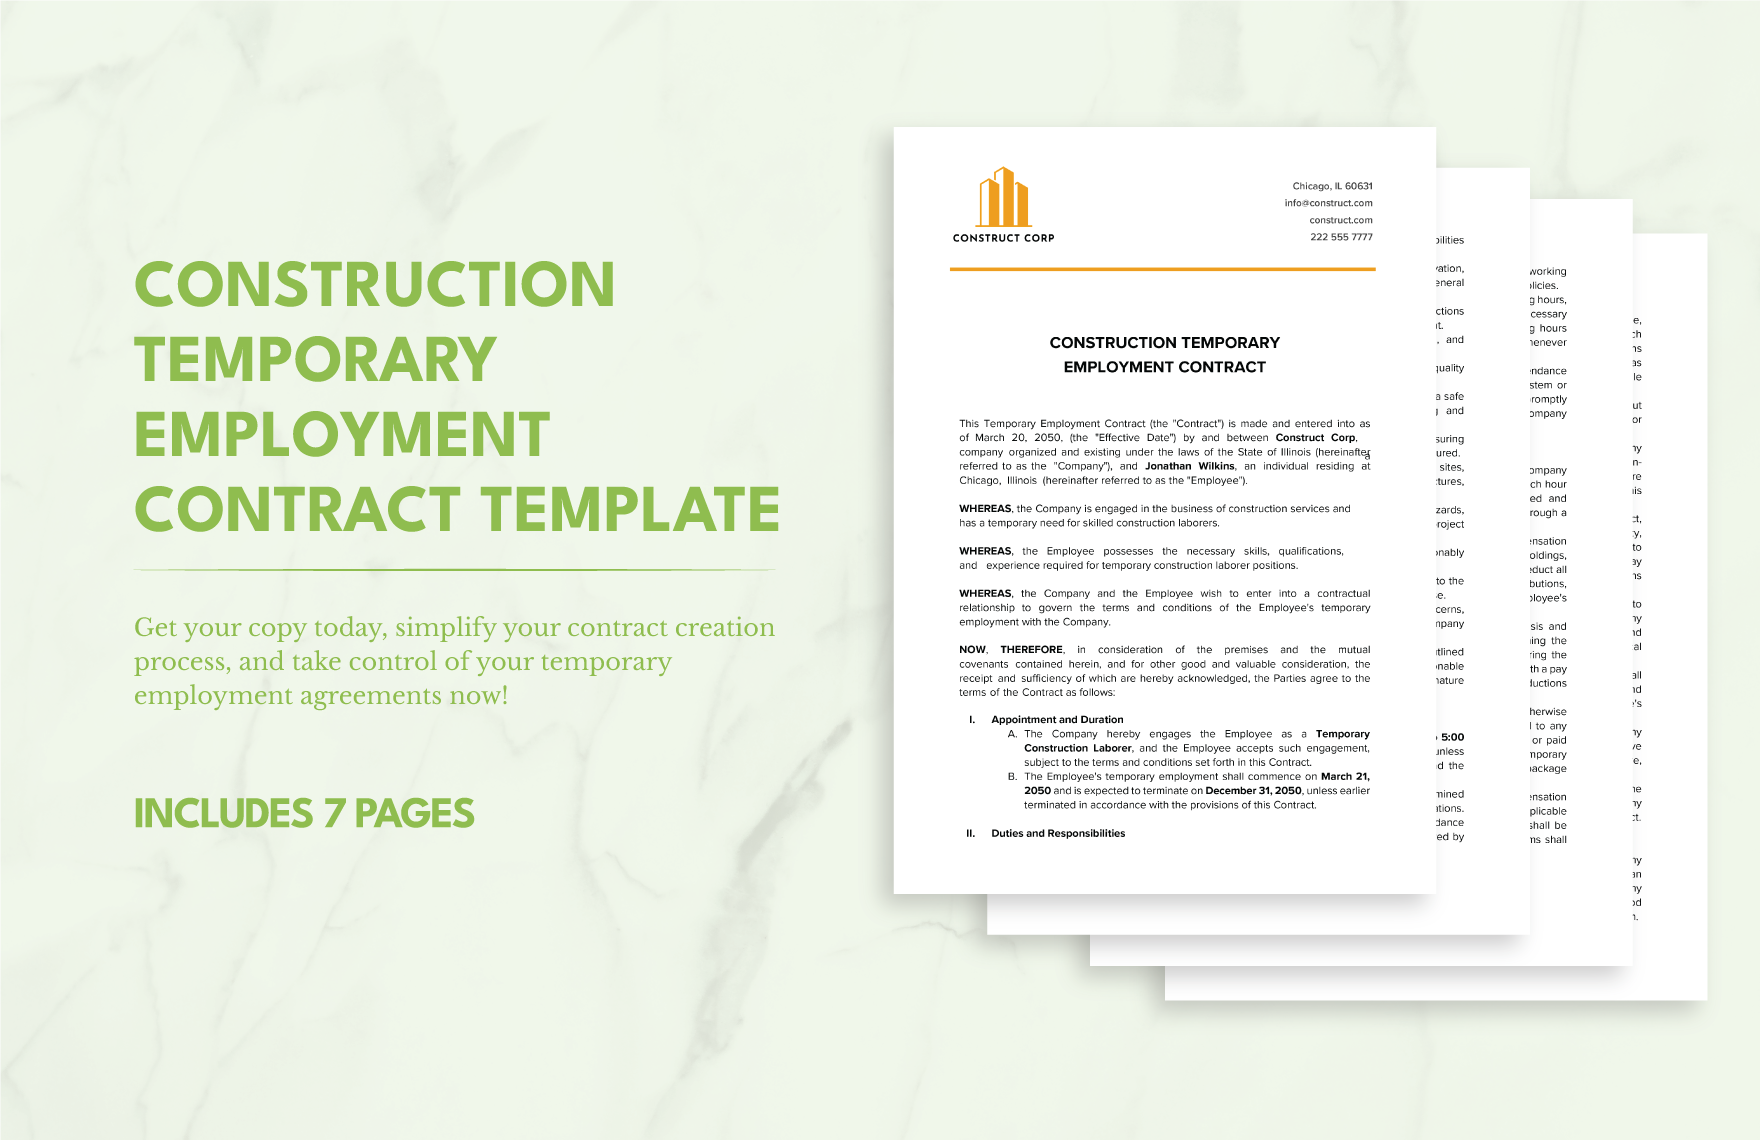 Construction Temporary Employment Contract Template